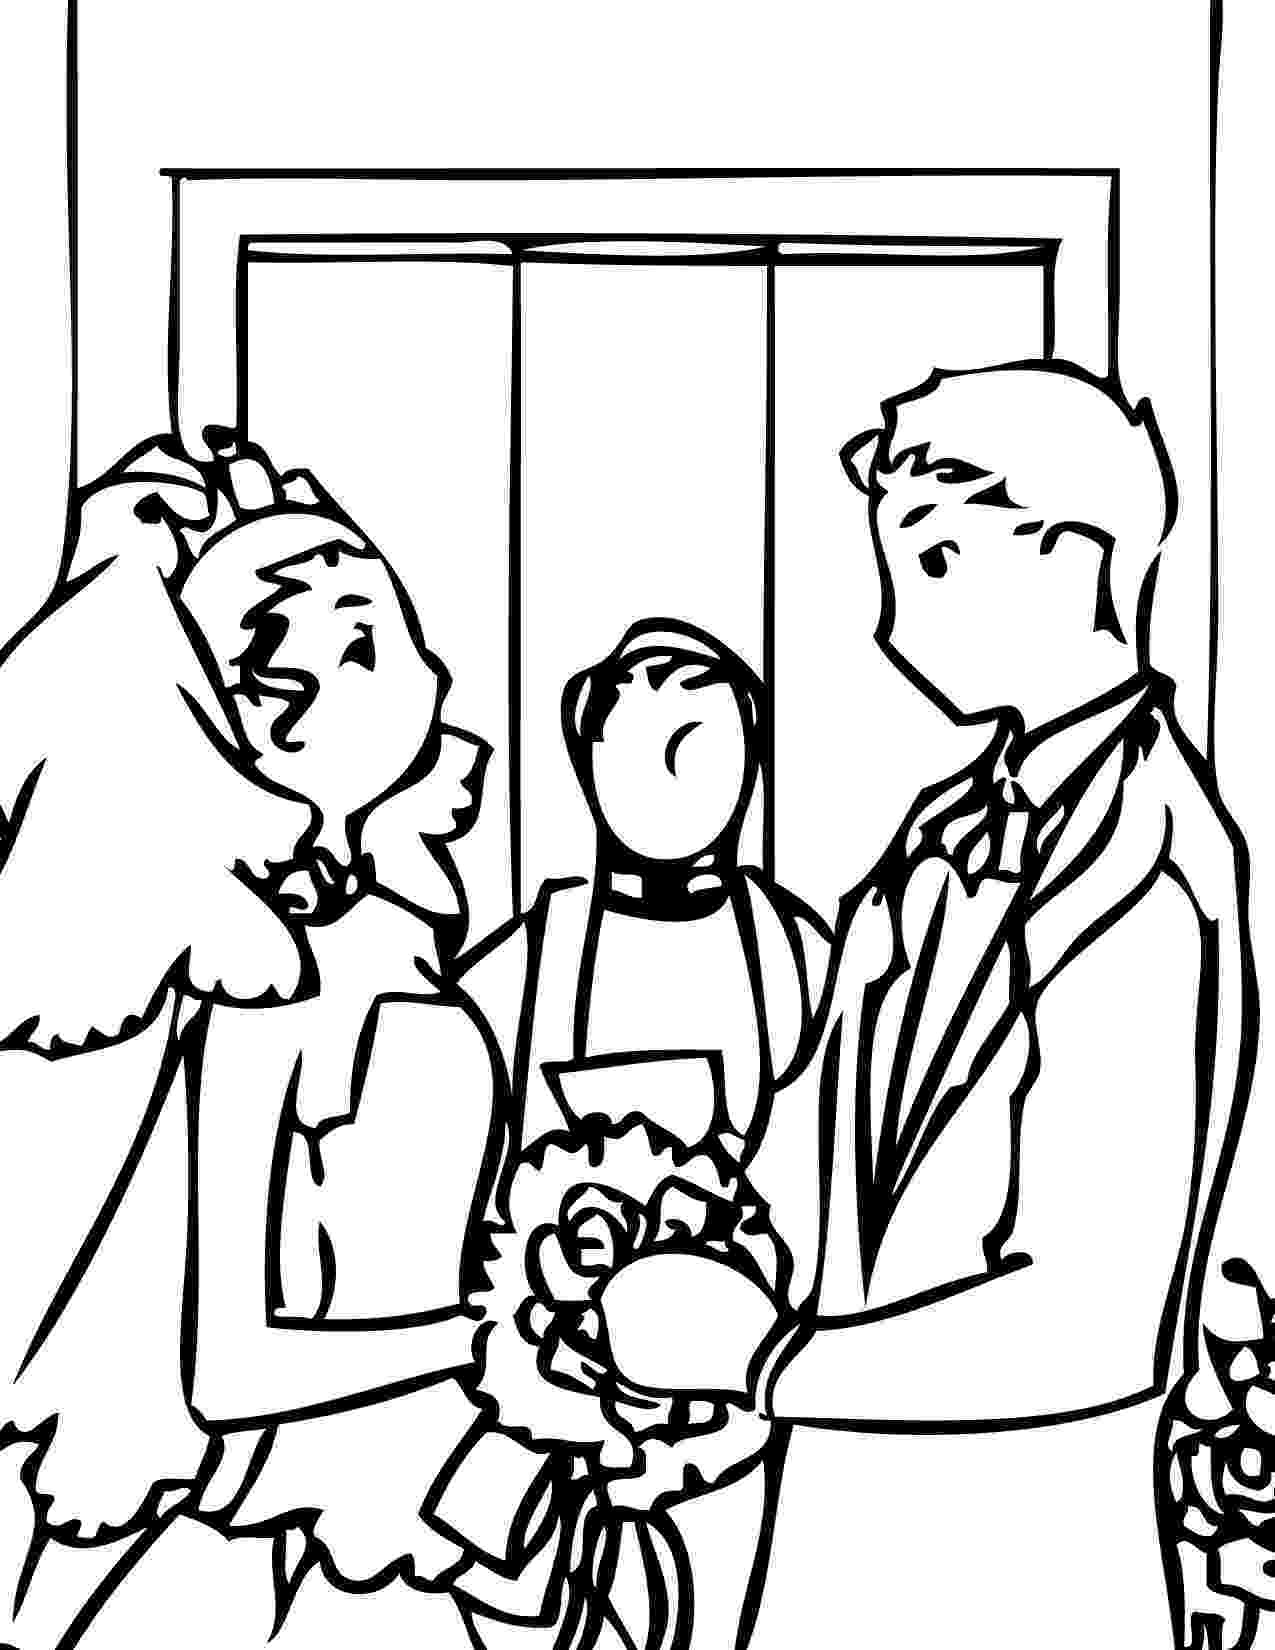 free wedding coloring pages to print wedding coloring pages bride and groom coloring wedding pages free print to 